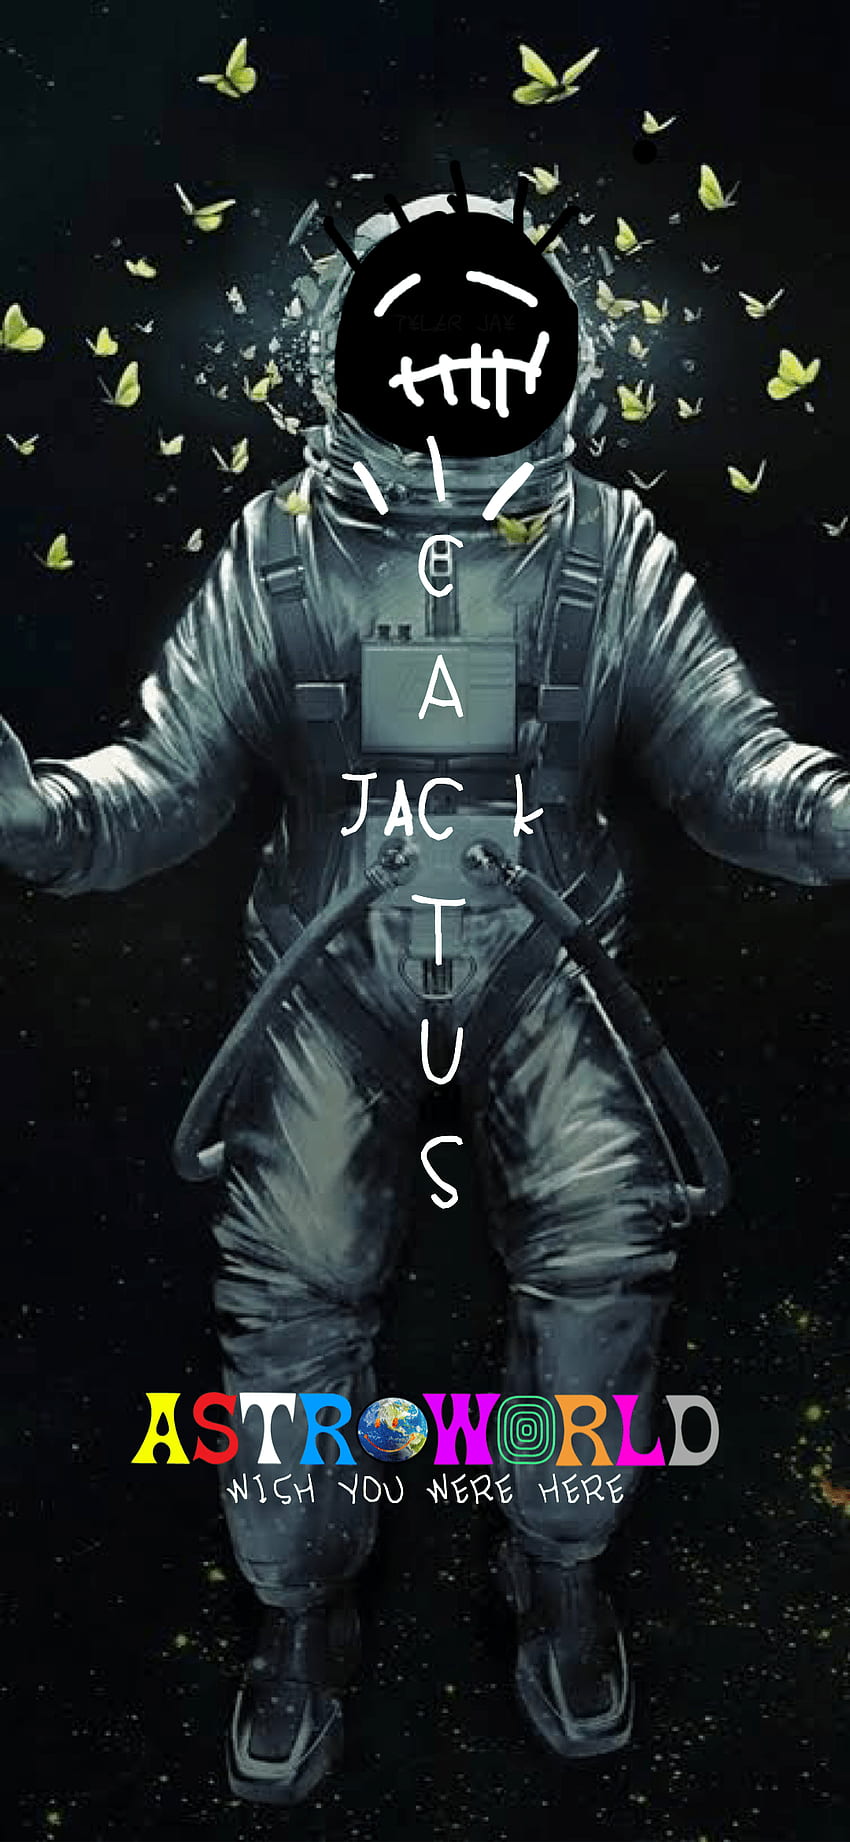 Cactus Jack for mobile phone, tablet, computer and other devices in 2021. Travis scott , Cactus jack , Travis scott iphone HD phone wallpaper